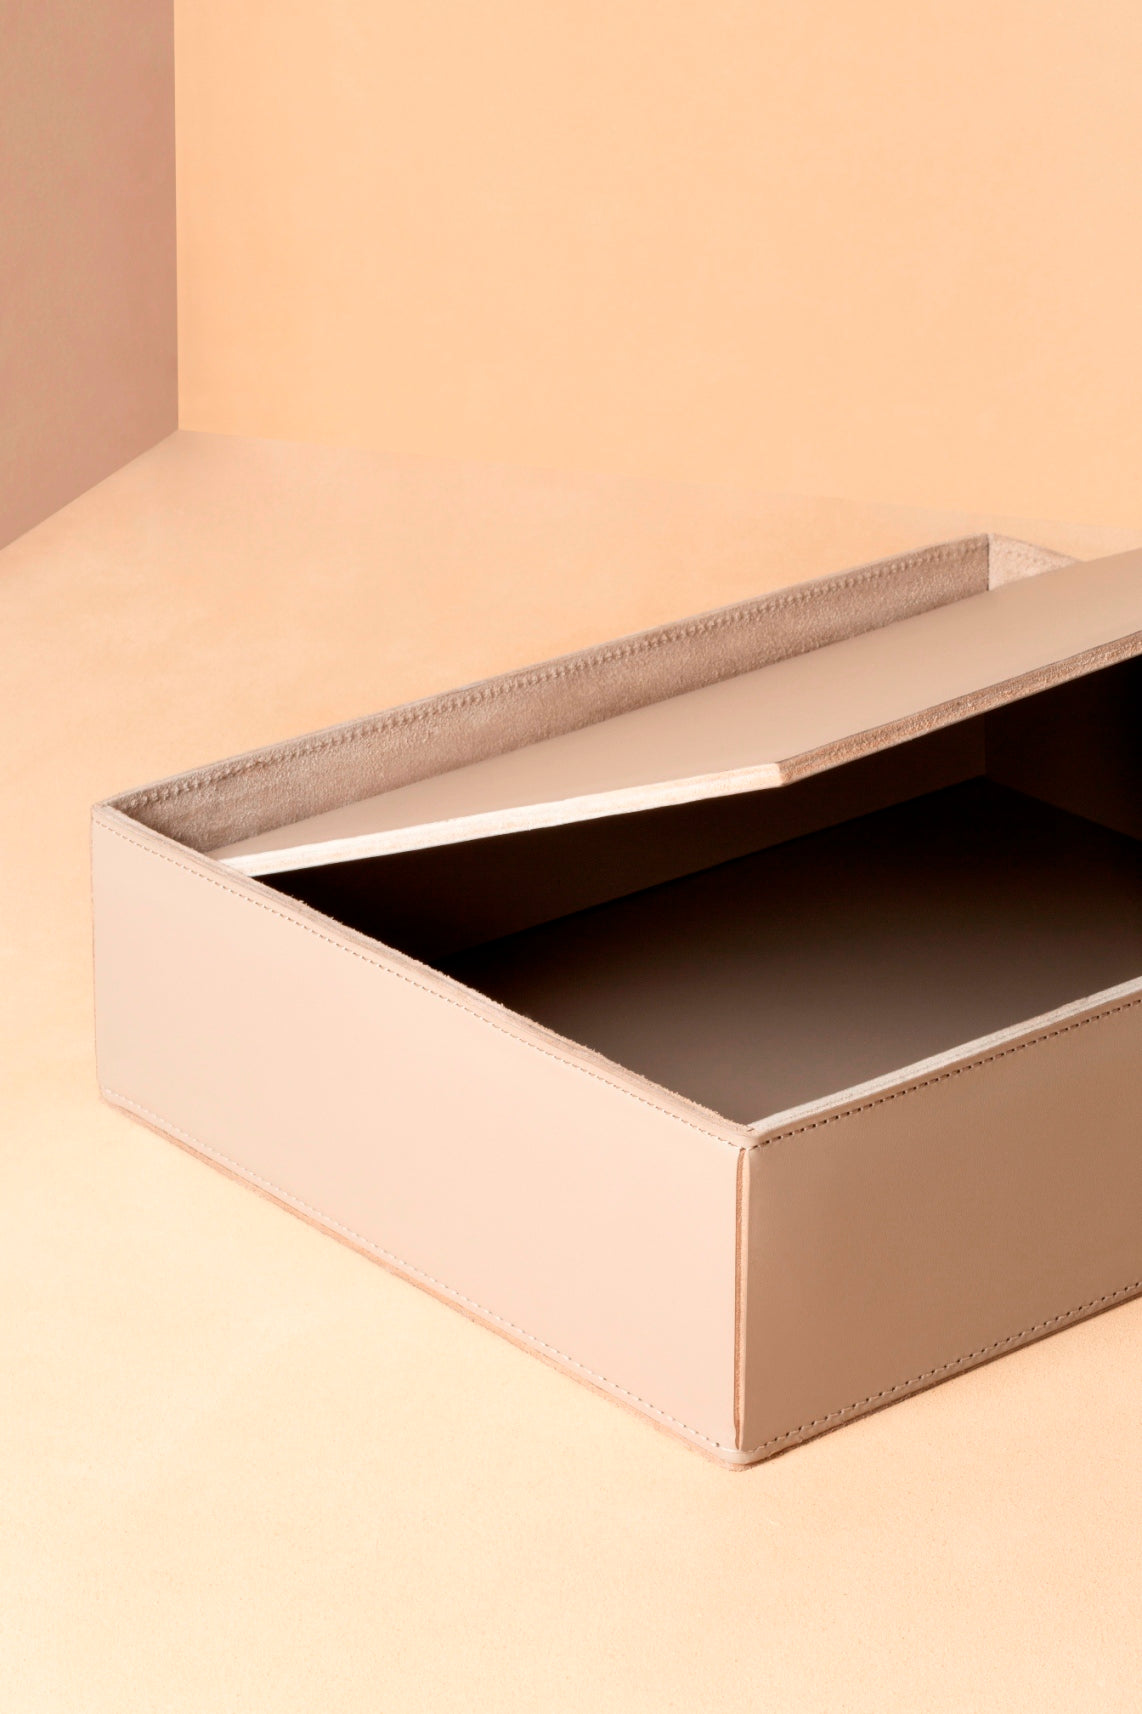 Rabitti 1969 Fold Saddle Leather Box | Elegant and Versatile Storage Box | Crafted with High-Quality Saddle Leather | Elevate Your Home Decor with Luxury and Style | Explore a Range of Luxury Accessories at 2Jour Concierge, #1 luxury high-end gift & lifestyle shop